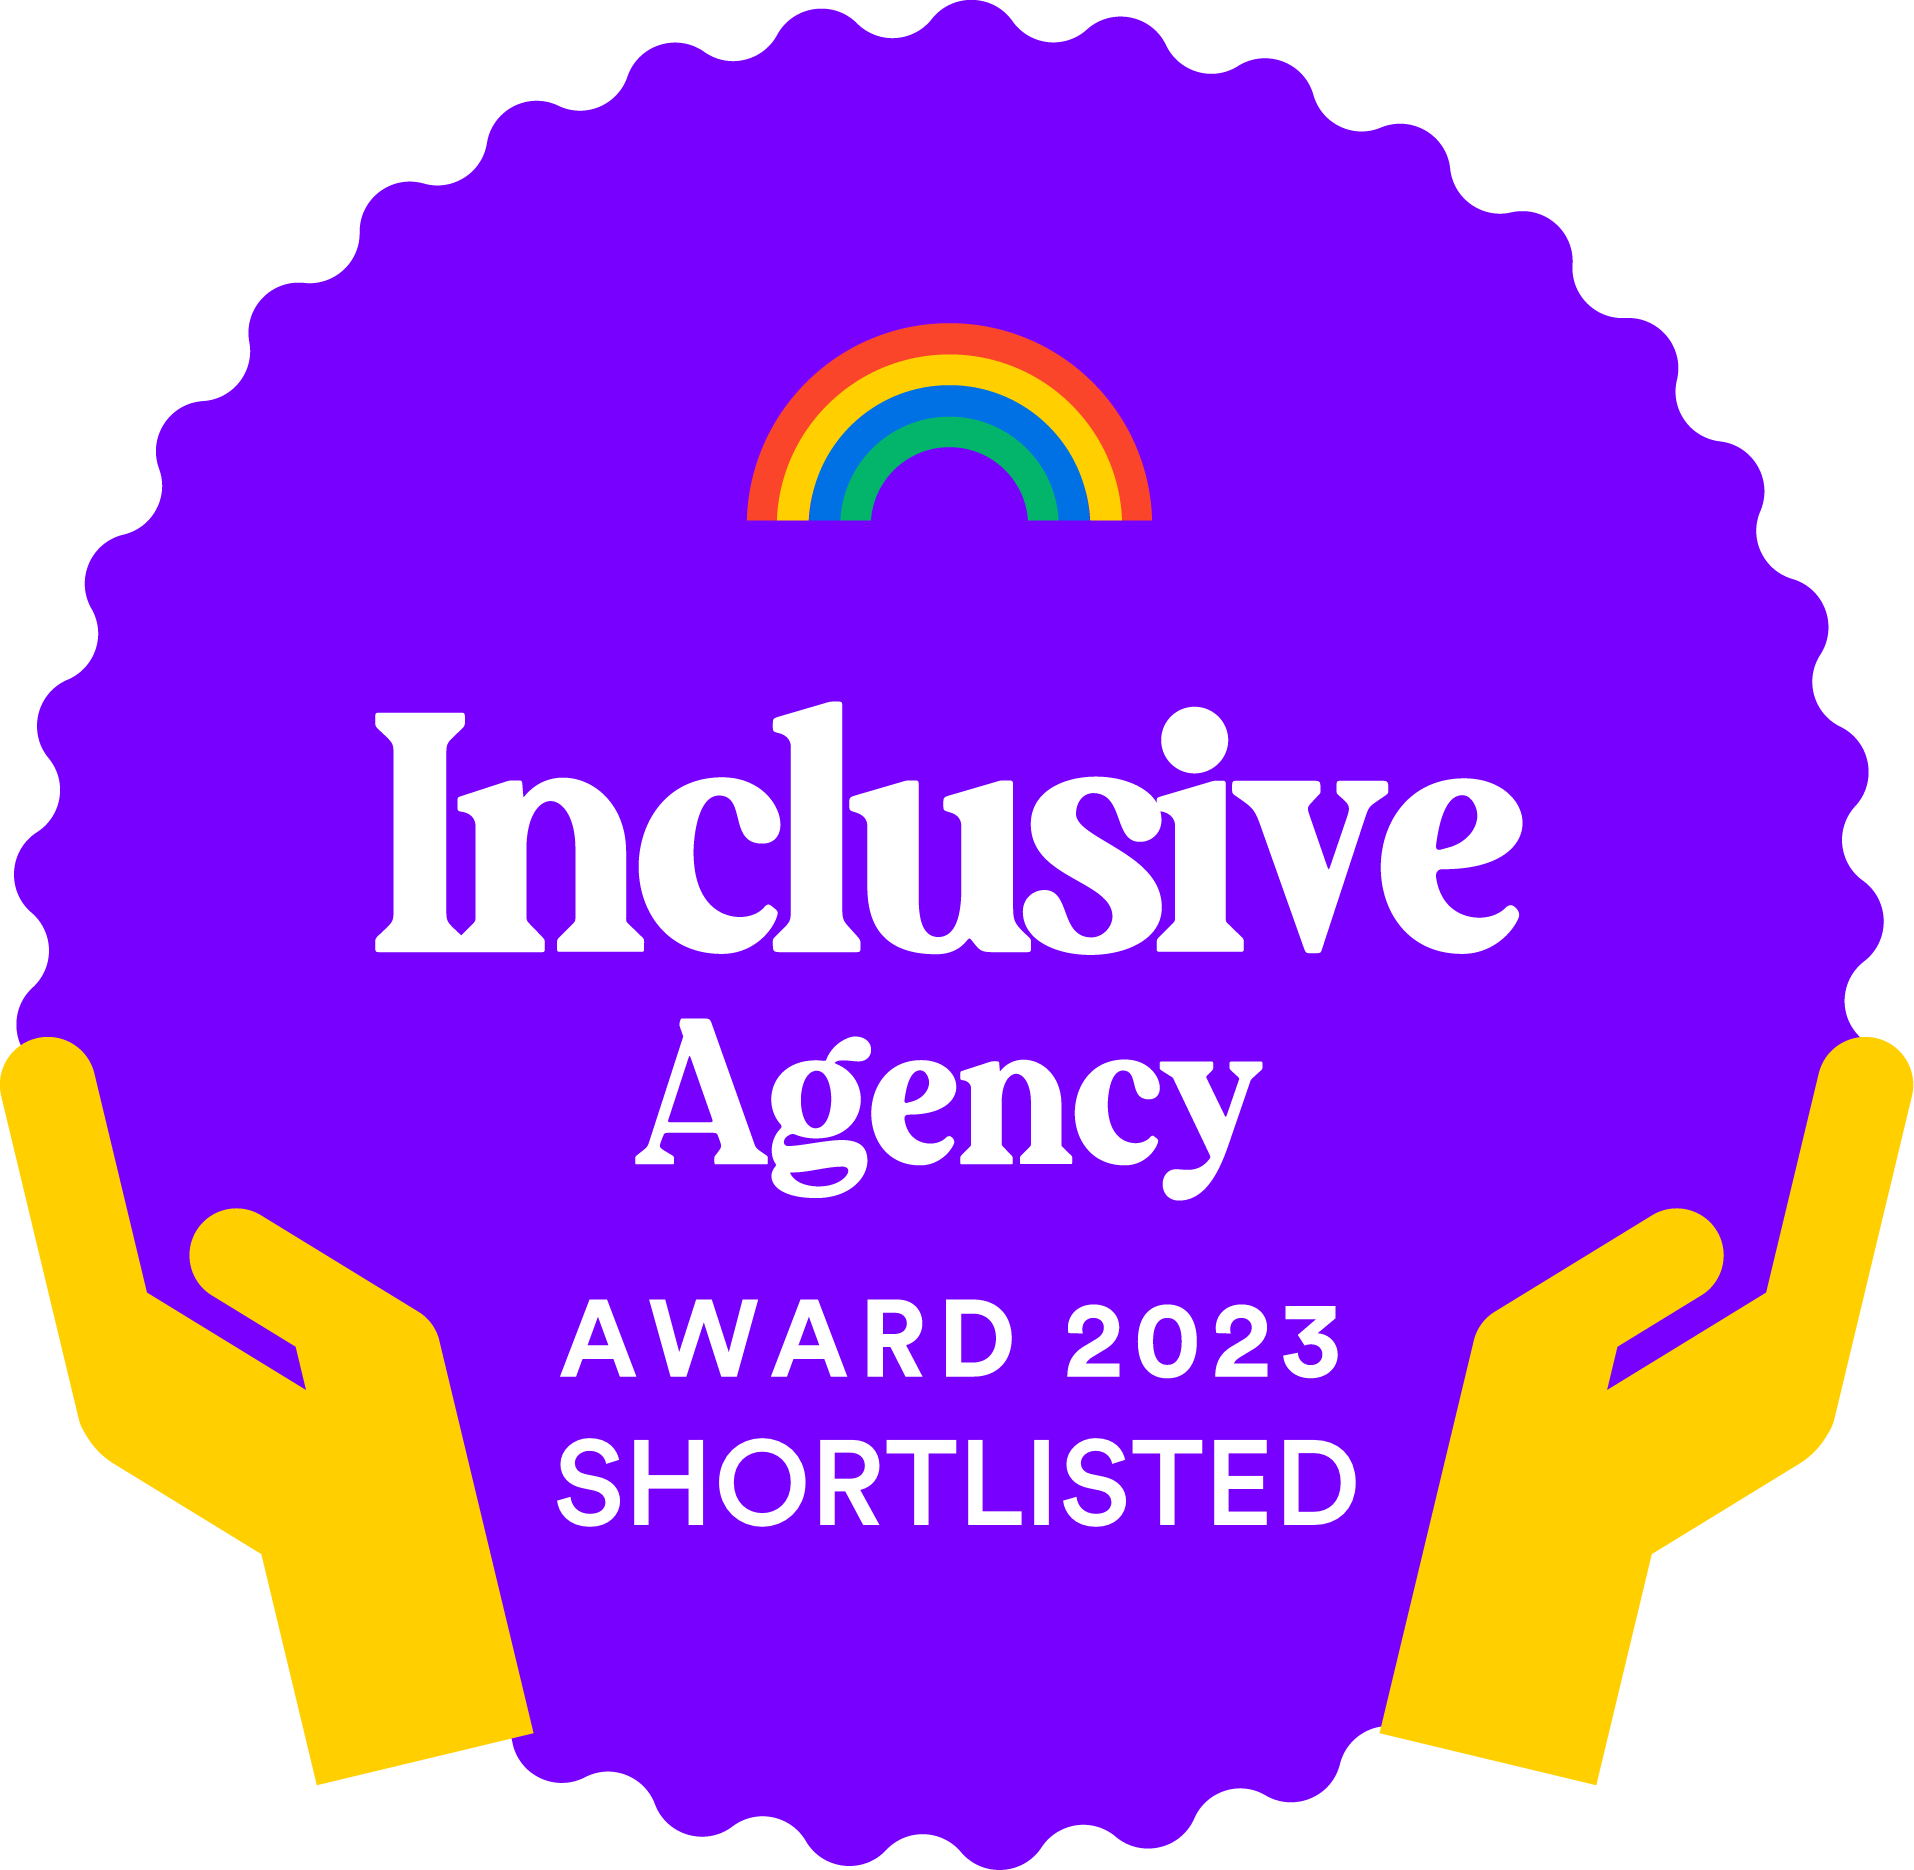 Good Agency Awards - Inclusive Shortlisted